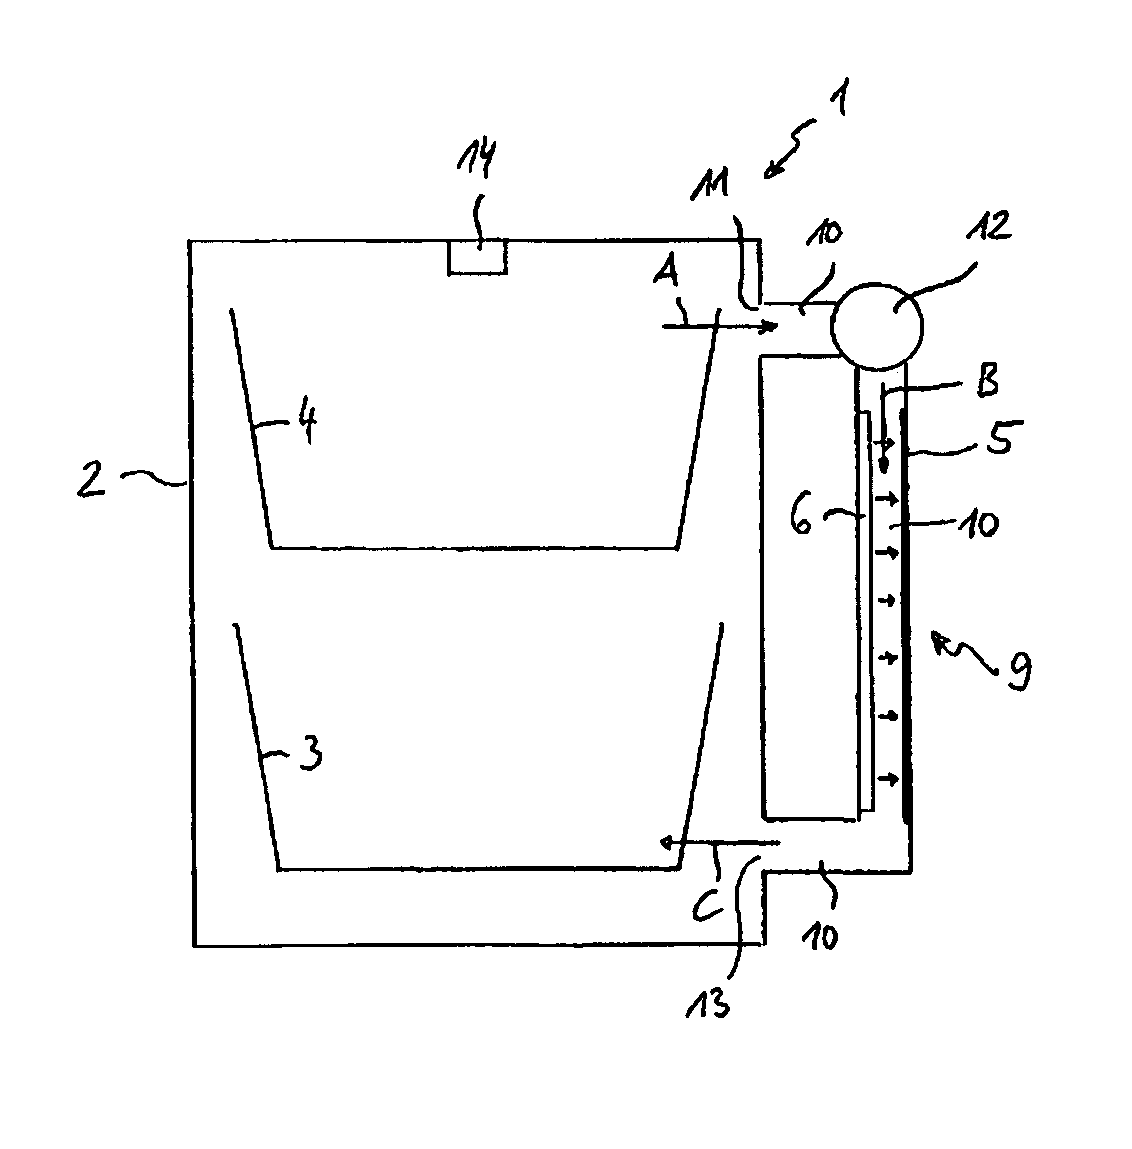 Method for eliminating odors in a dishwasher machine